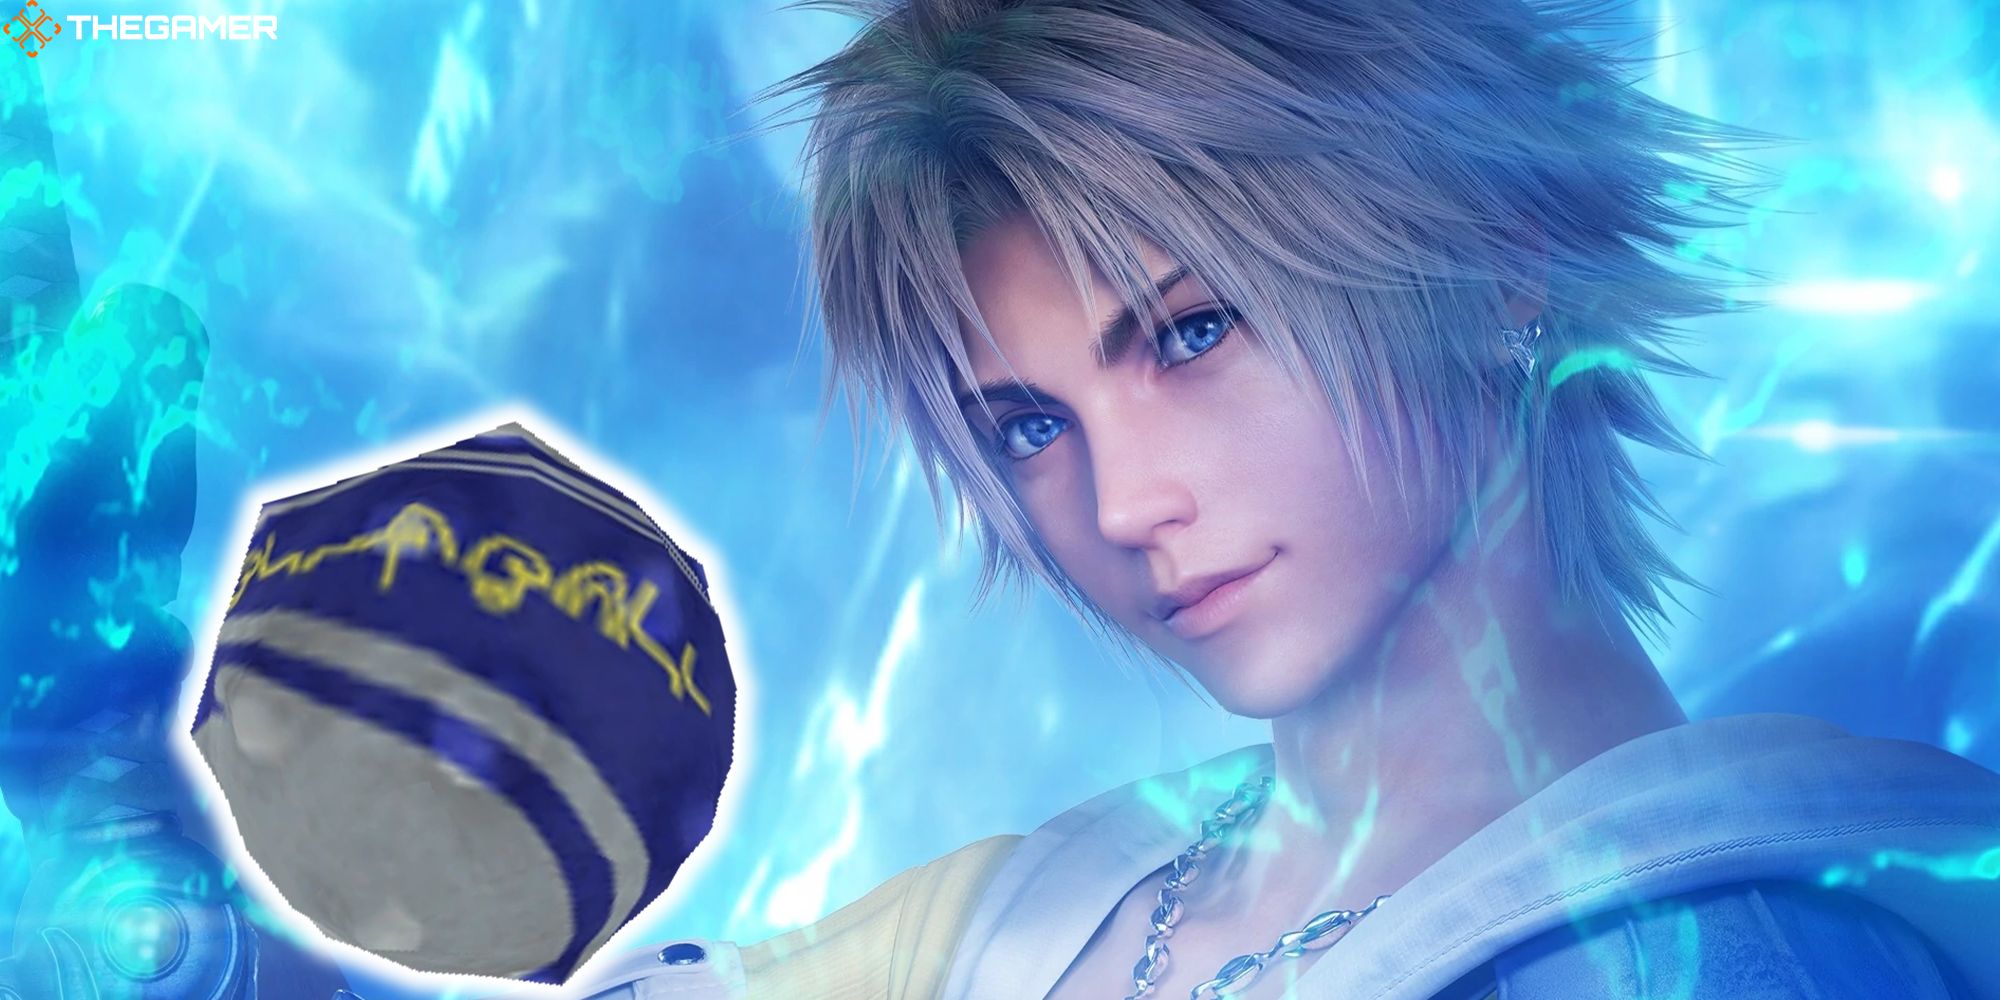 A blitzball positioned next to a portrait of Tidus from Final Fantasy X. Custom image for TG.